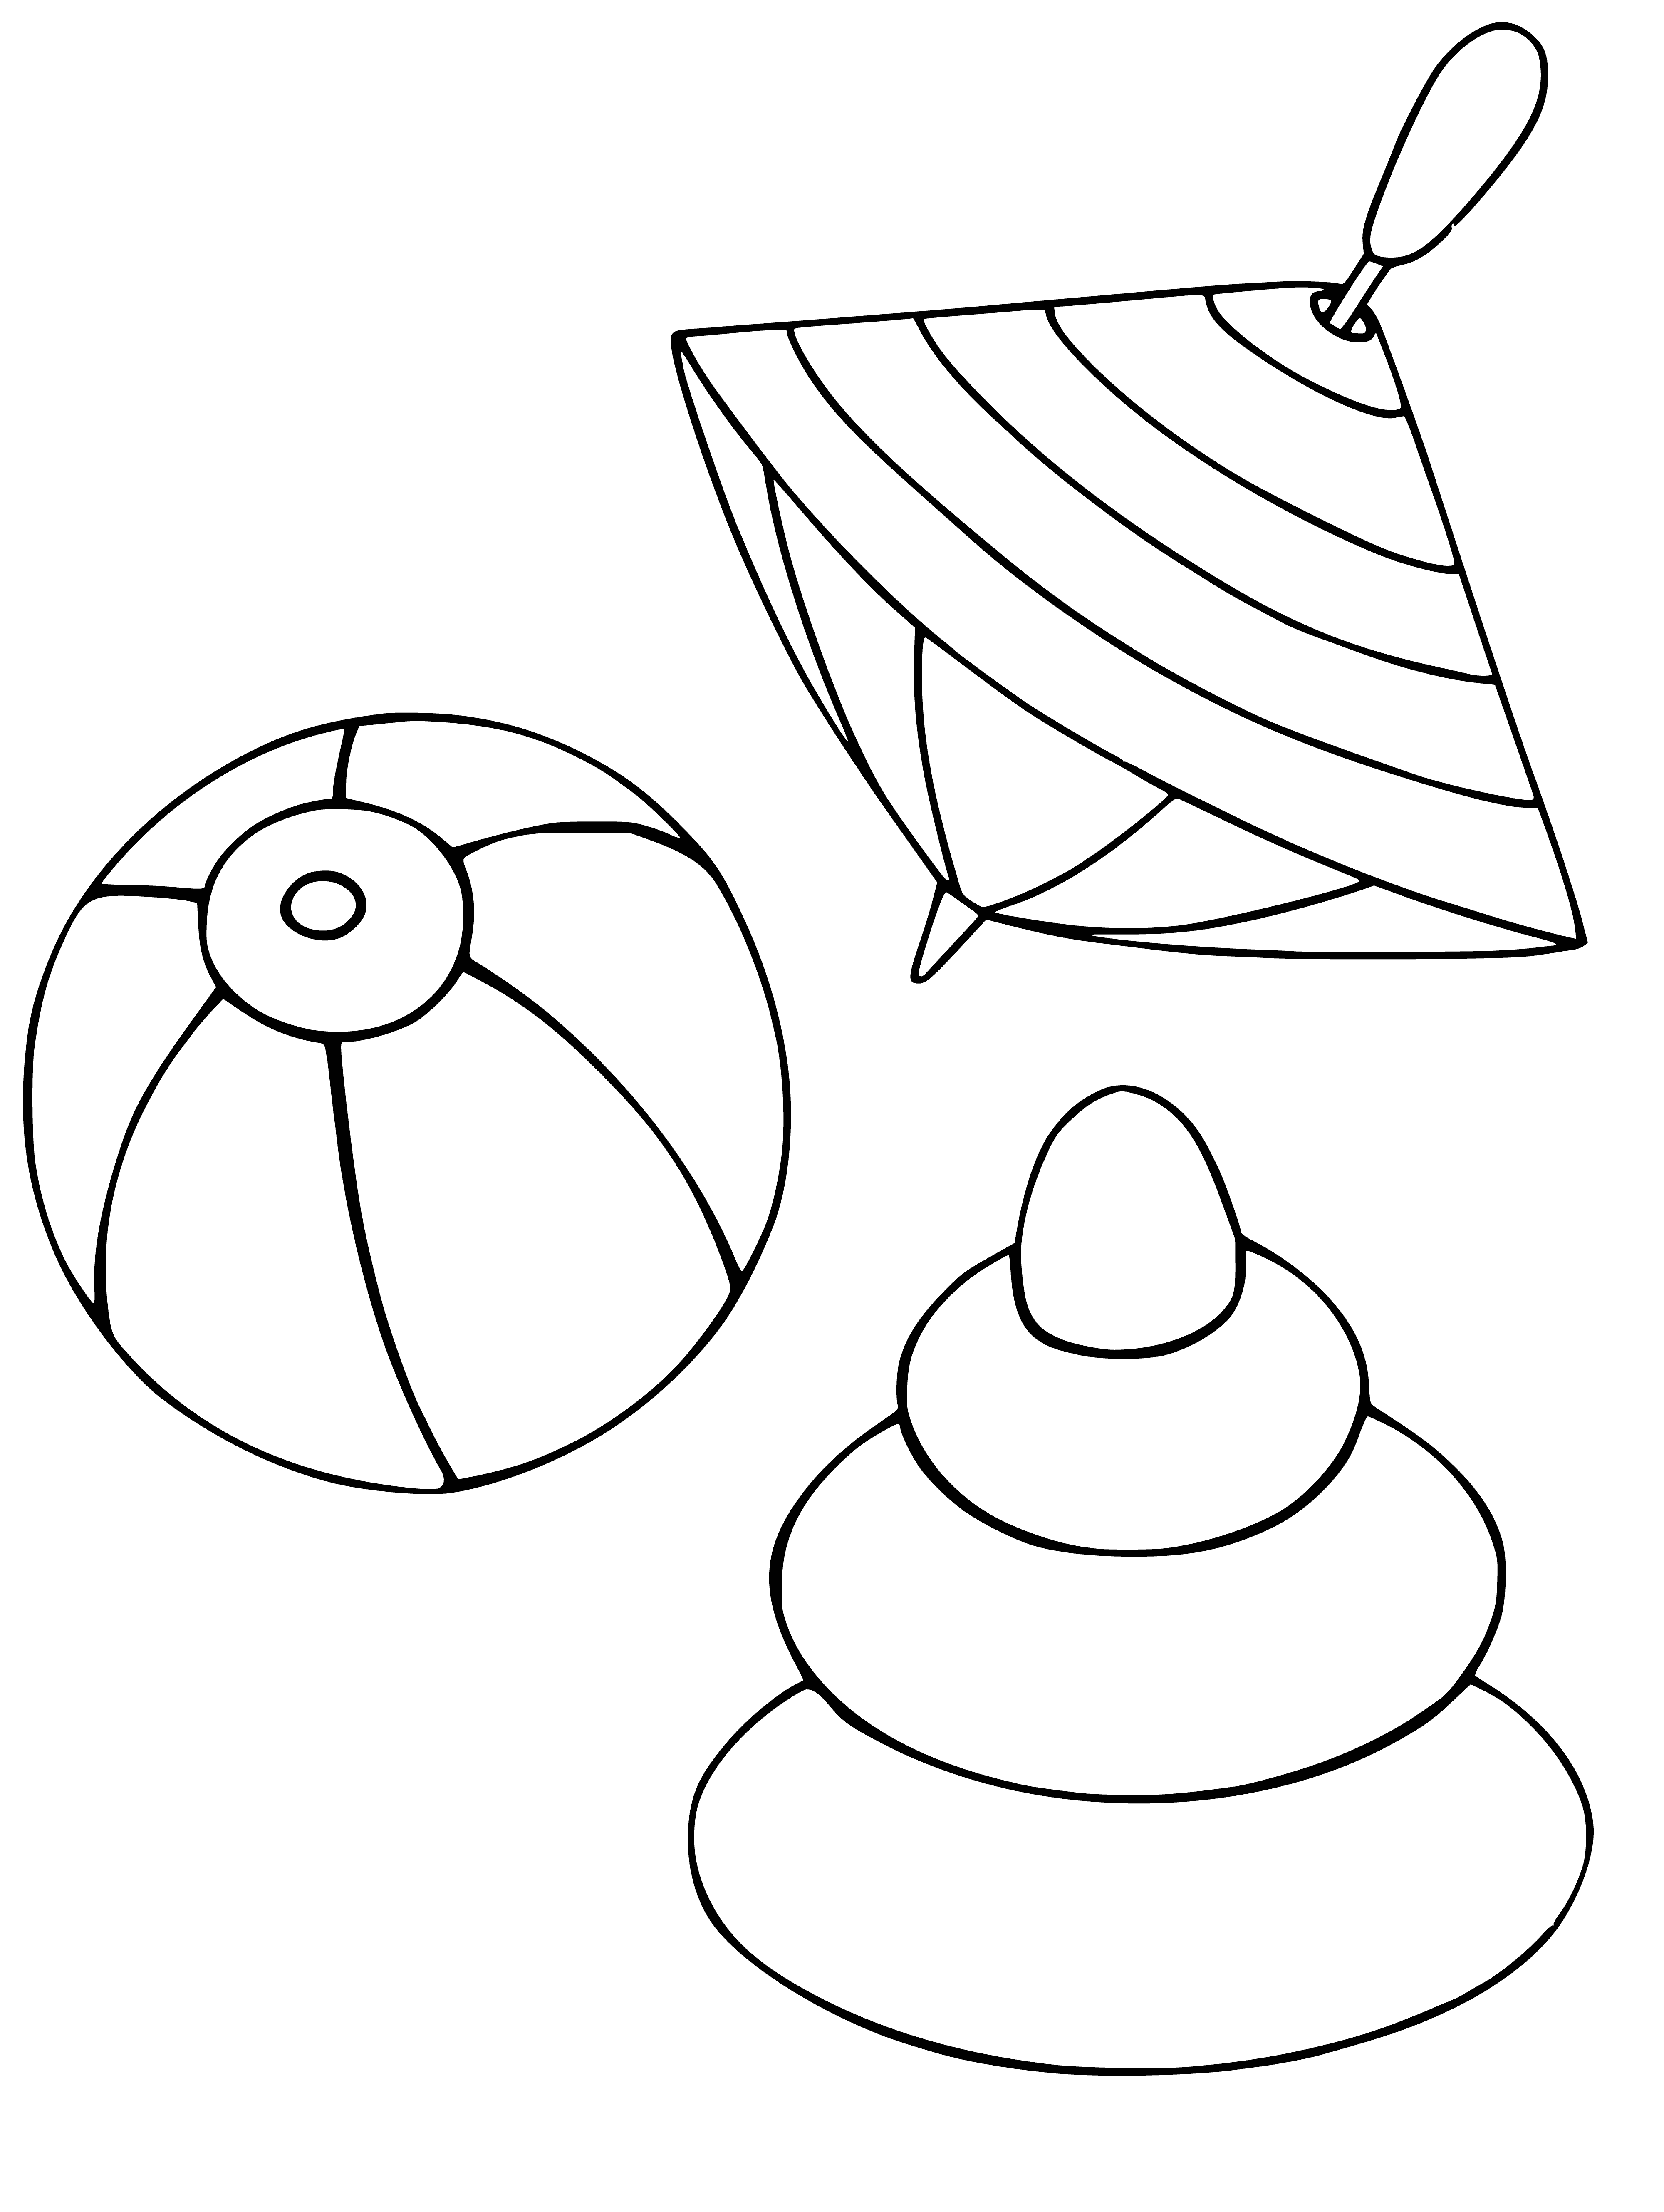 coloring page: Three things to color: a spinning top, ball, and whirligig!